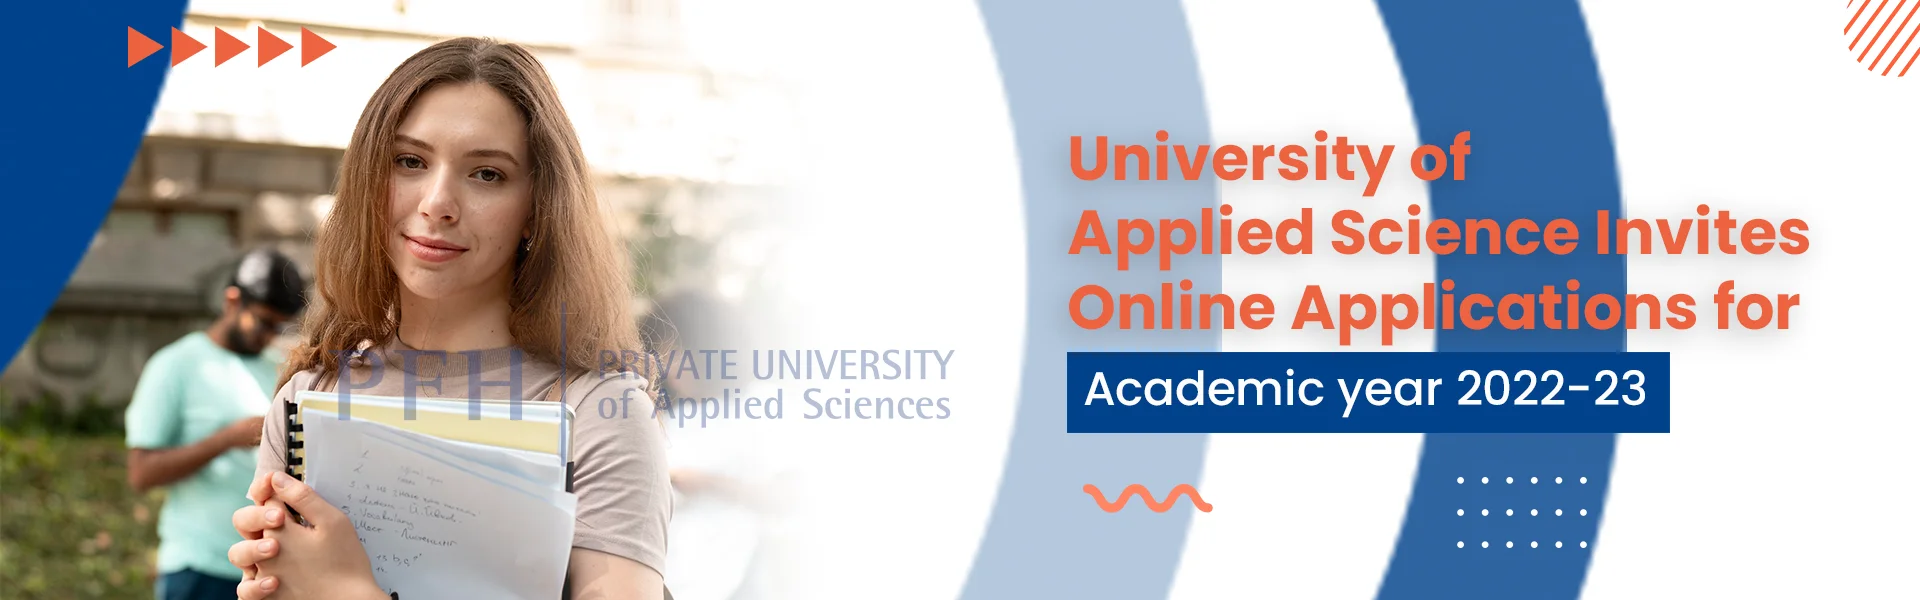 University of Applied Science invites online applications for academic